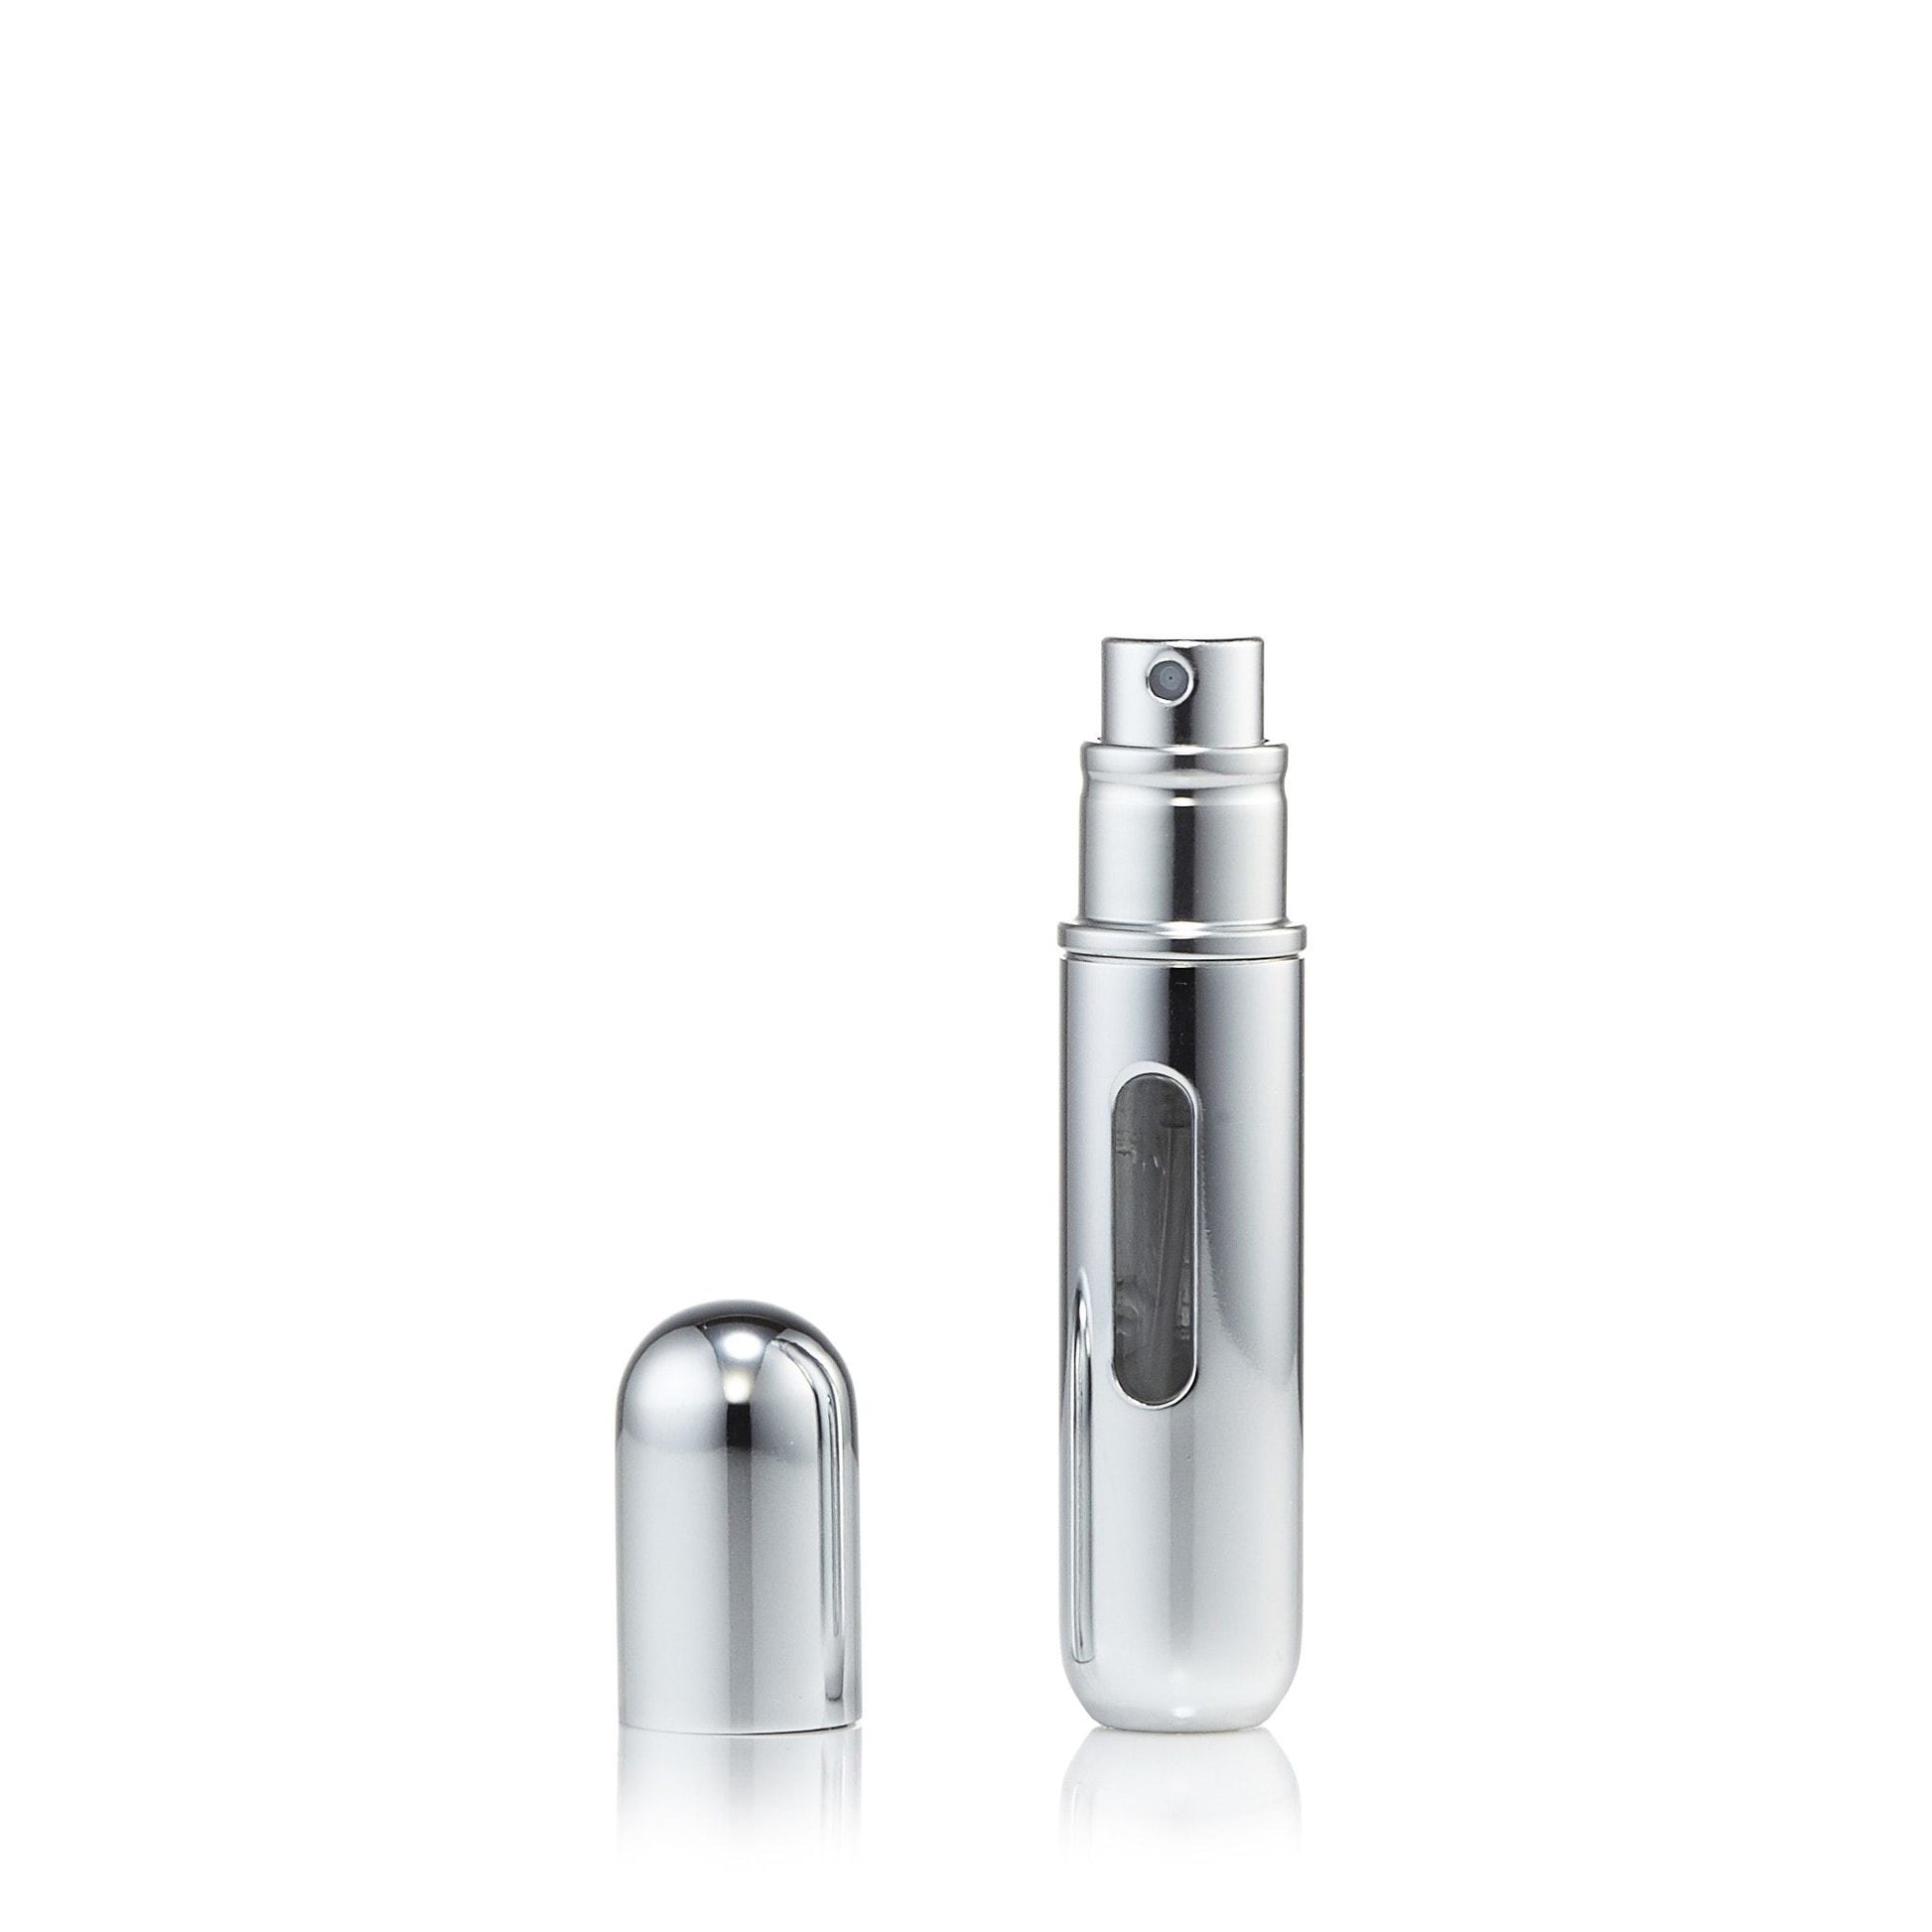 Pump and Fill Fragrance Atomizer by Flo – Fragrance Outlet